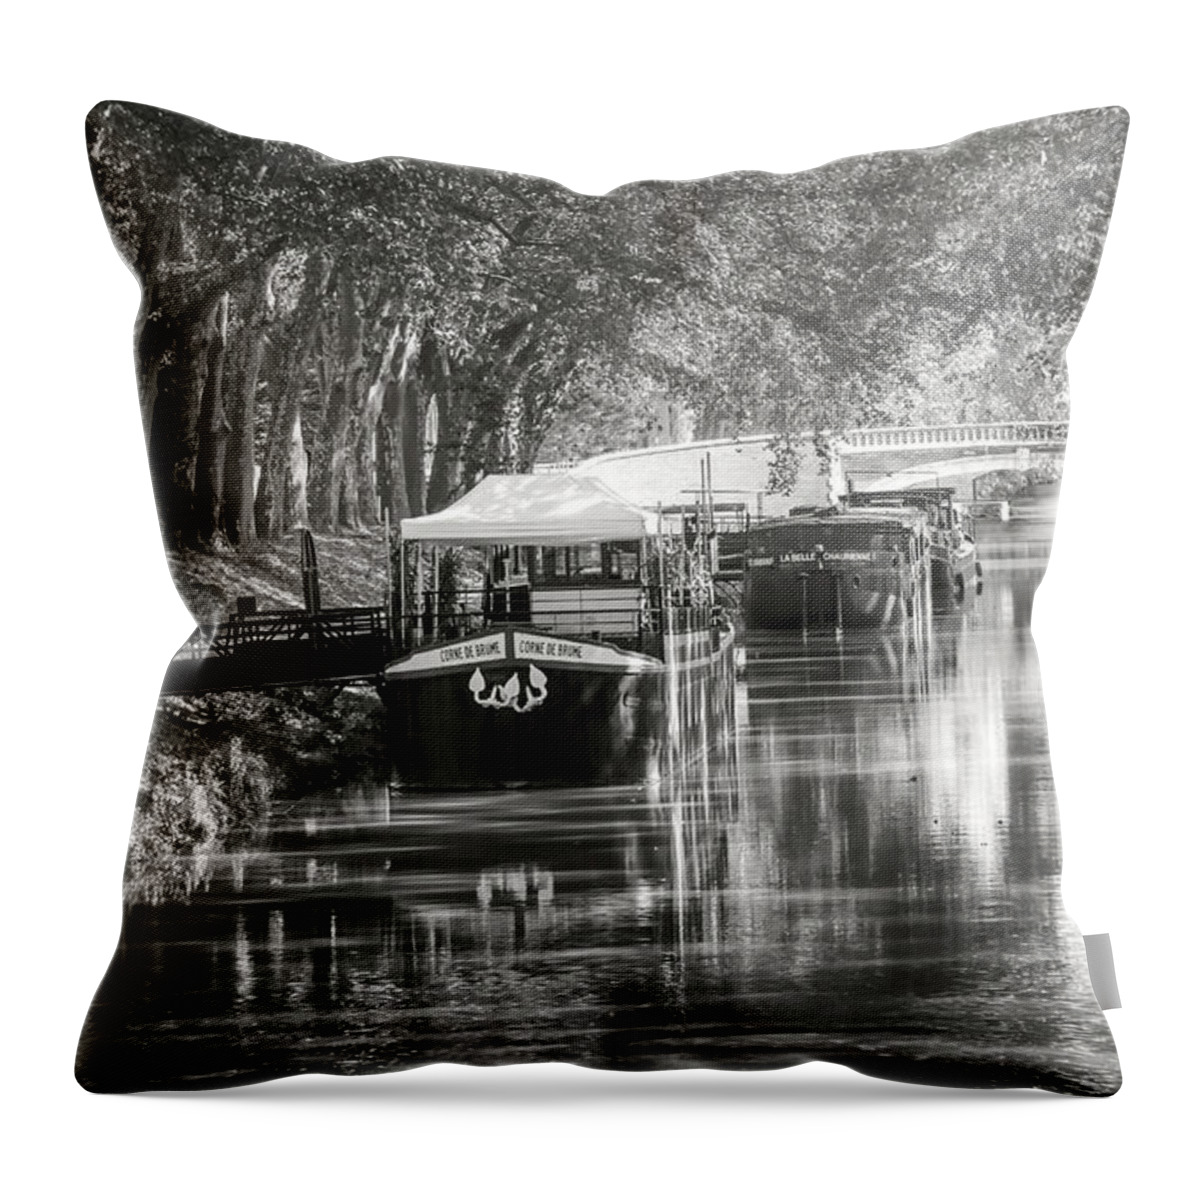 Toulouse Throw Pillow featuring the photograph Barges on Canal de Brienne Toulouse France Black and White by Carol Japp